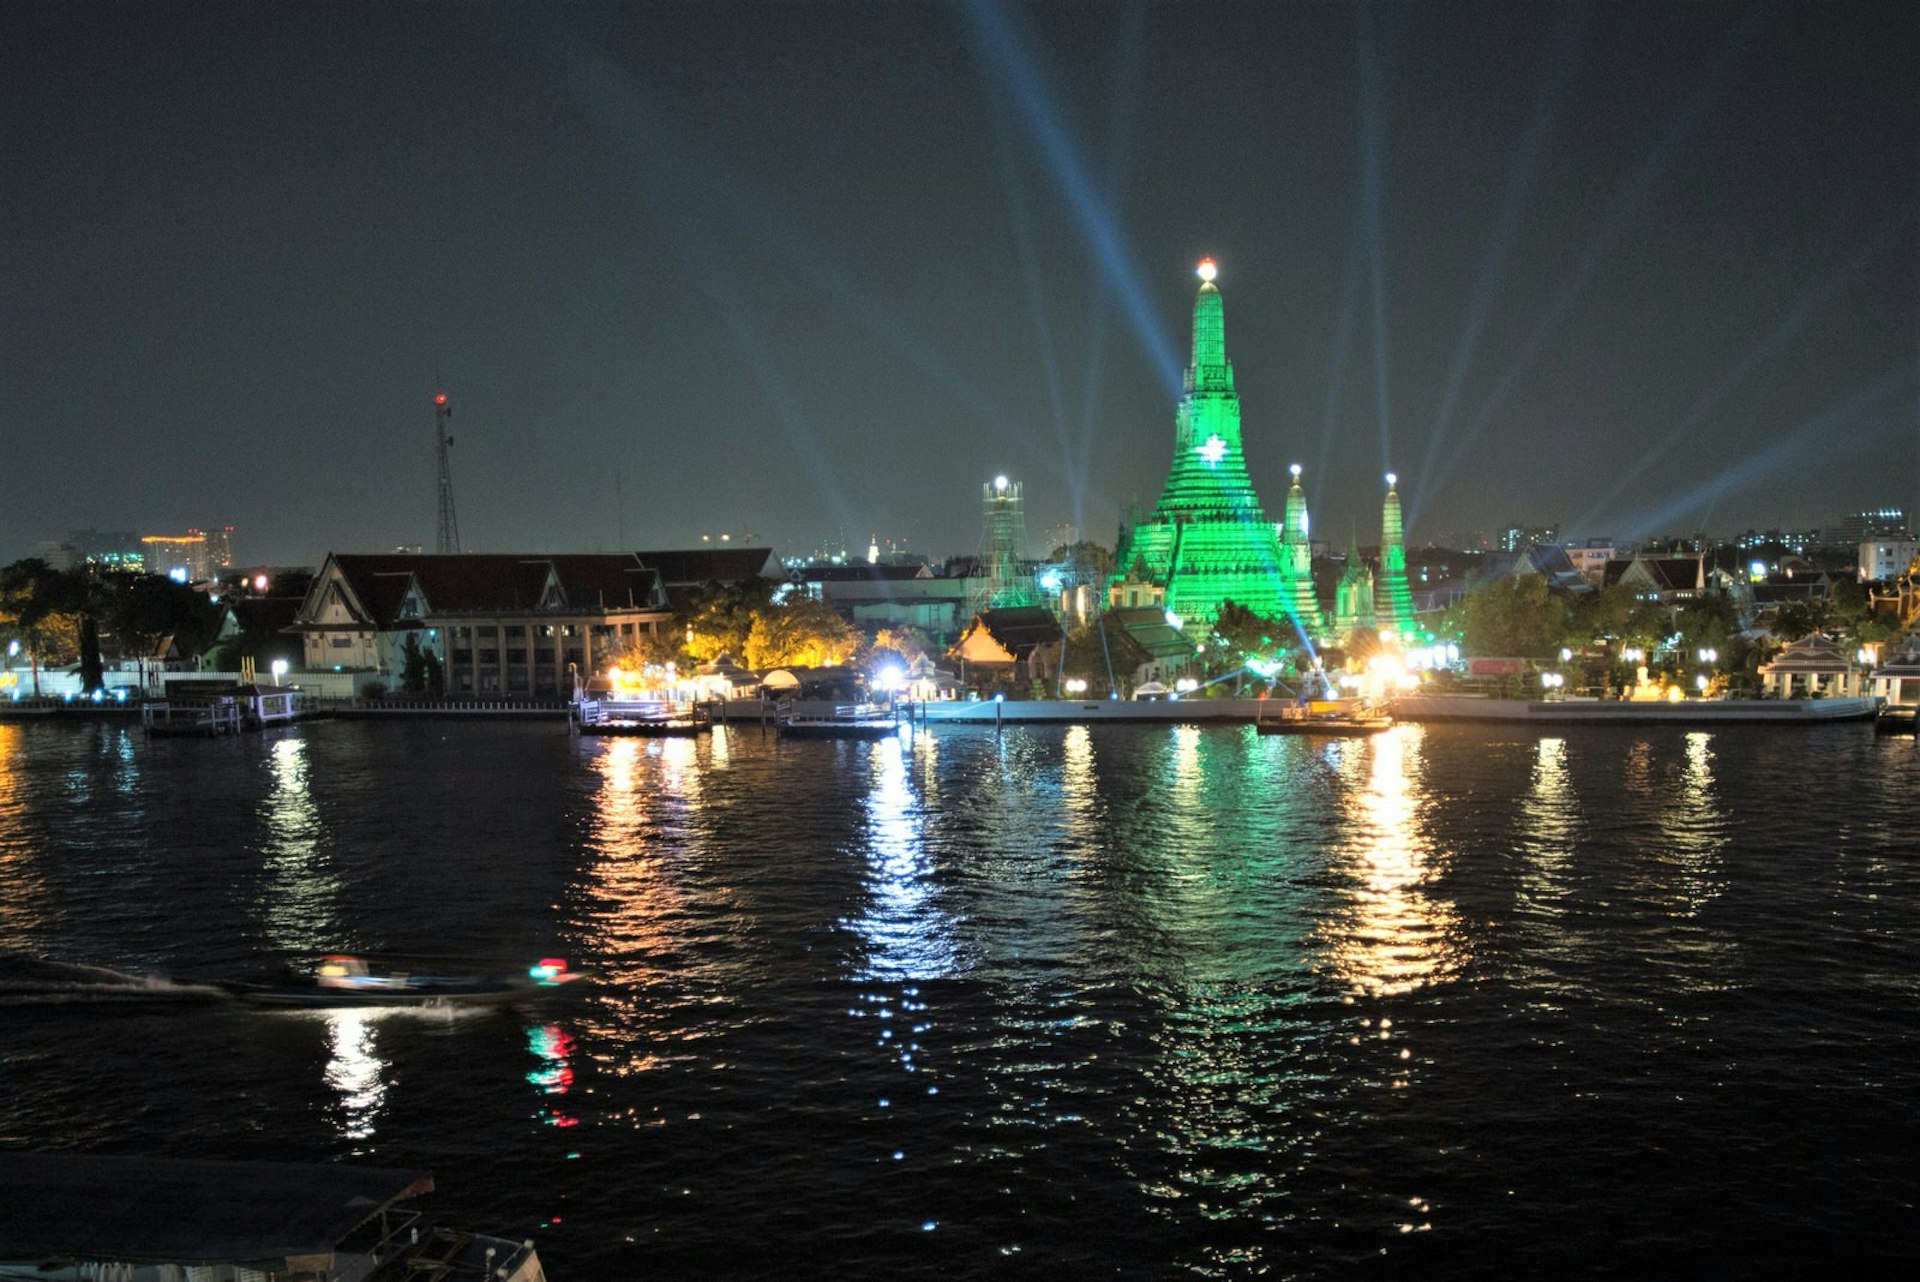 Night view of Wat Arun, illuminated green, looking across the river from the Roof bar © Austin Bush / Lonely Planet